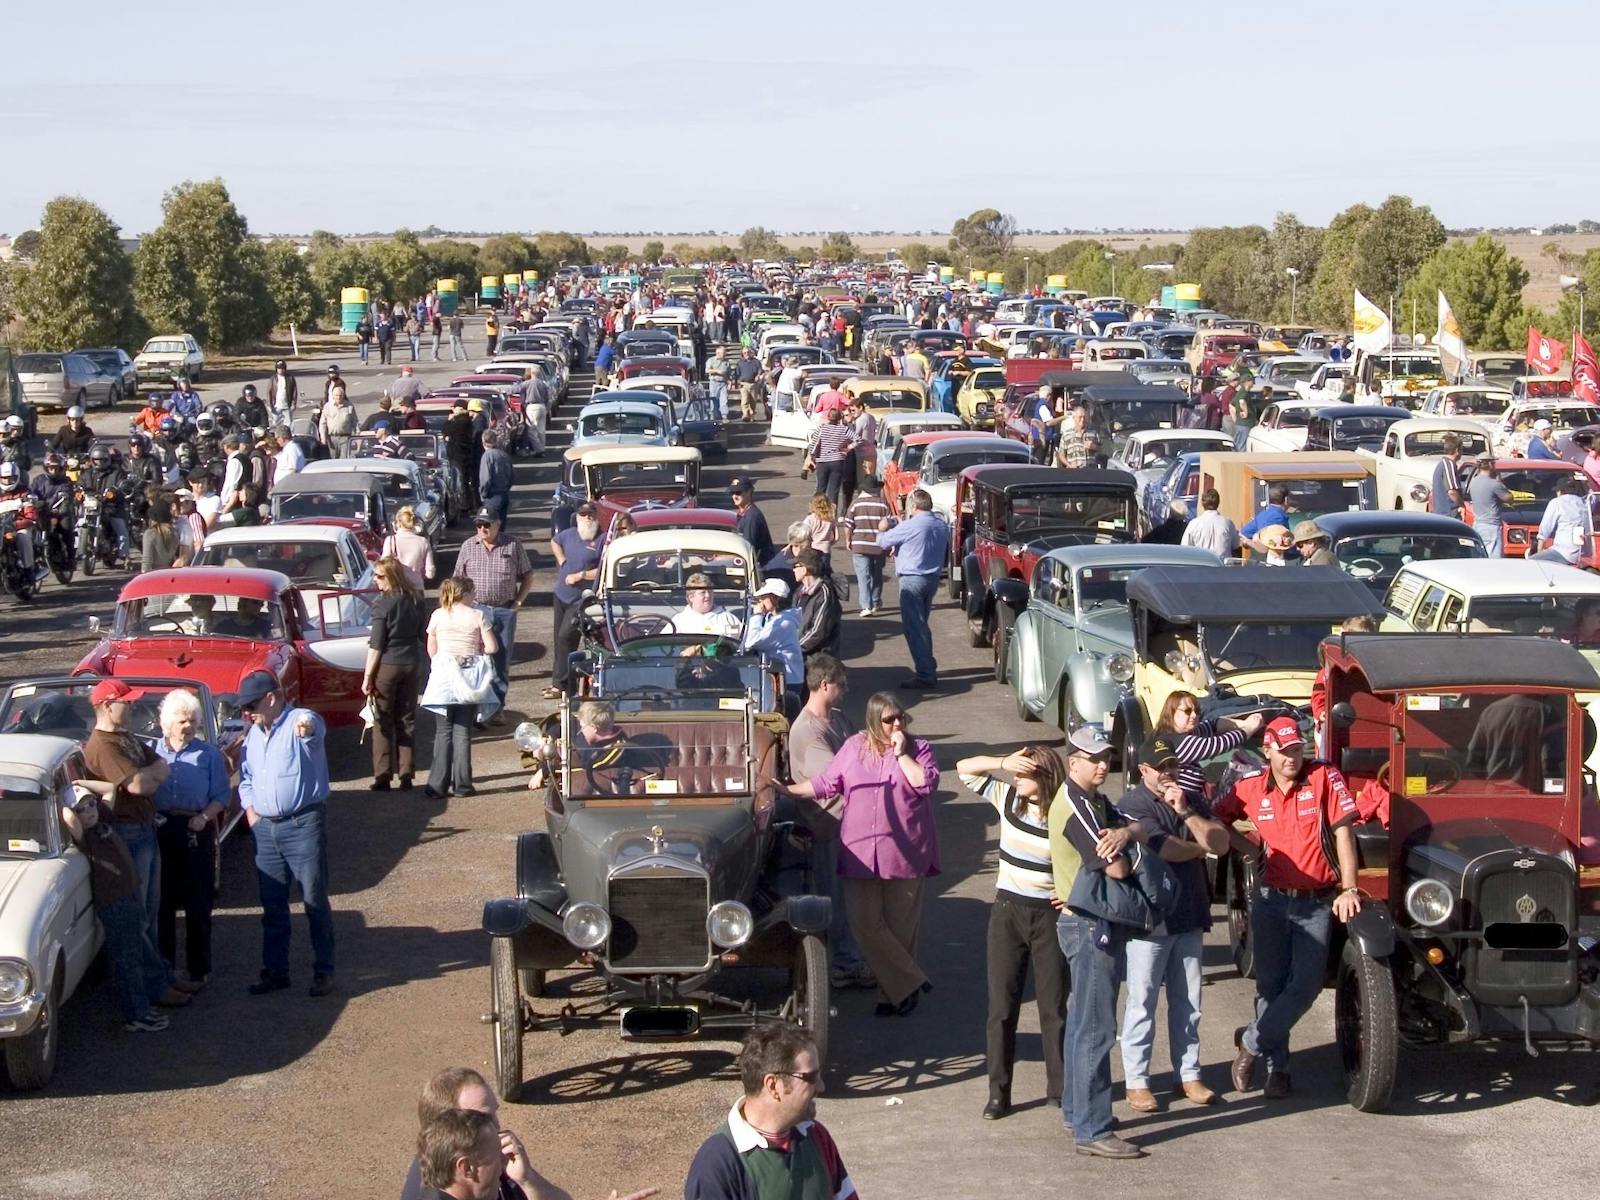 Image for RAA/Enfield's Copper Coast Classic Cavalcade of Cars and Motorcycles